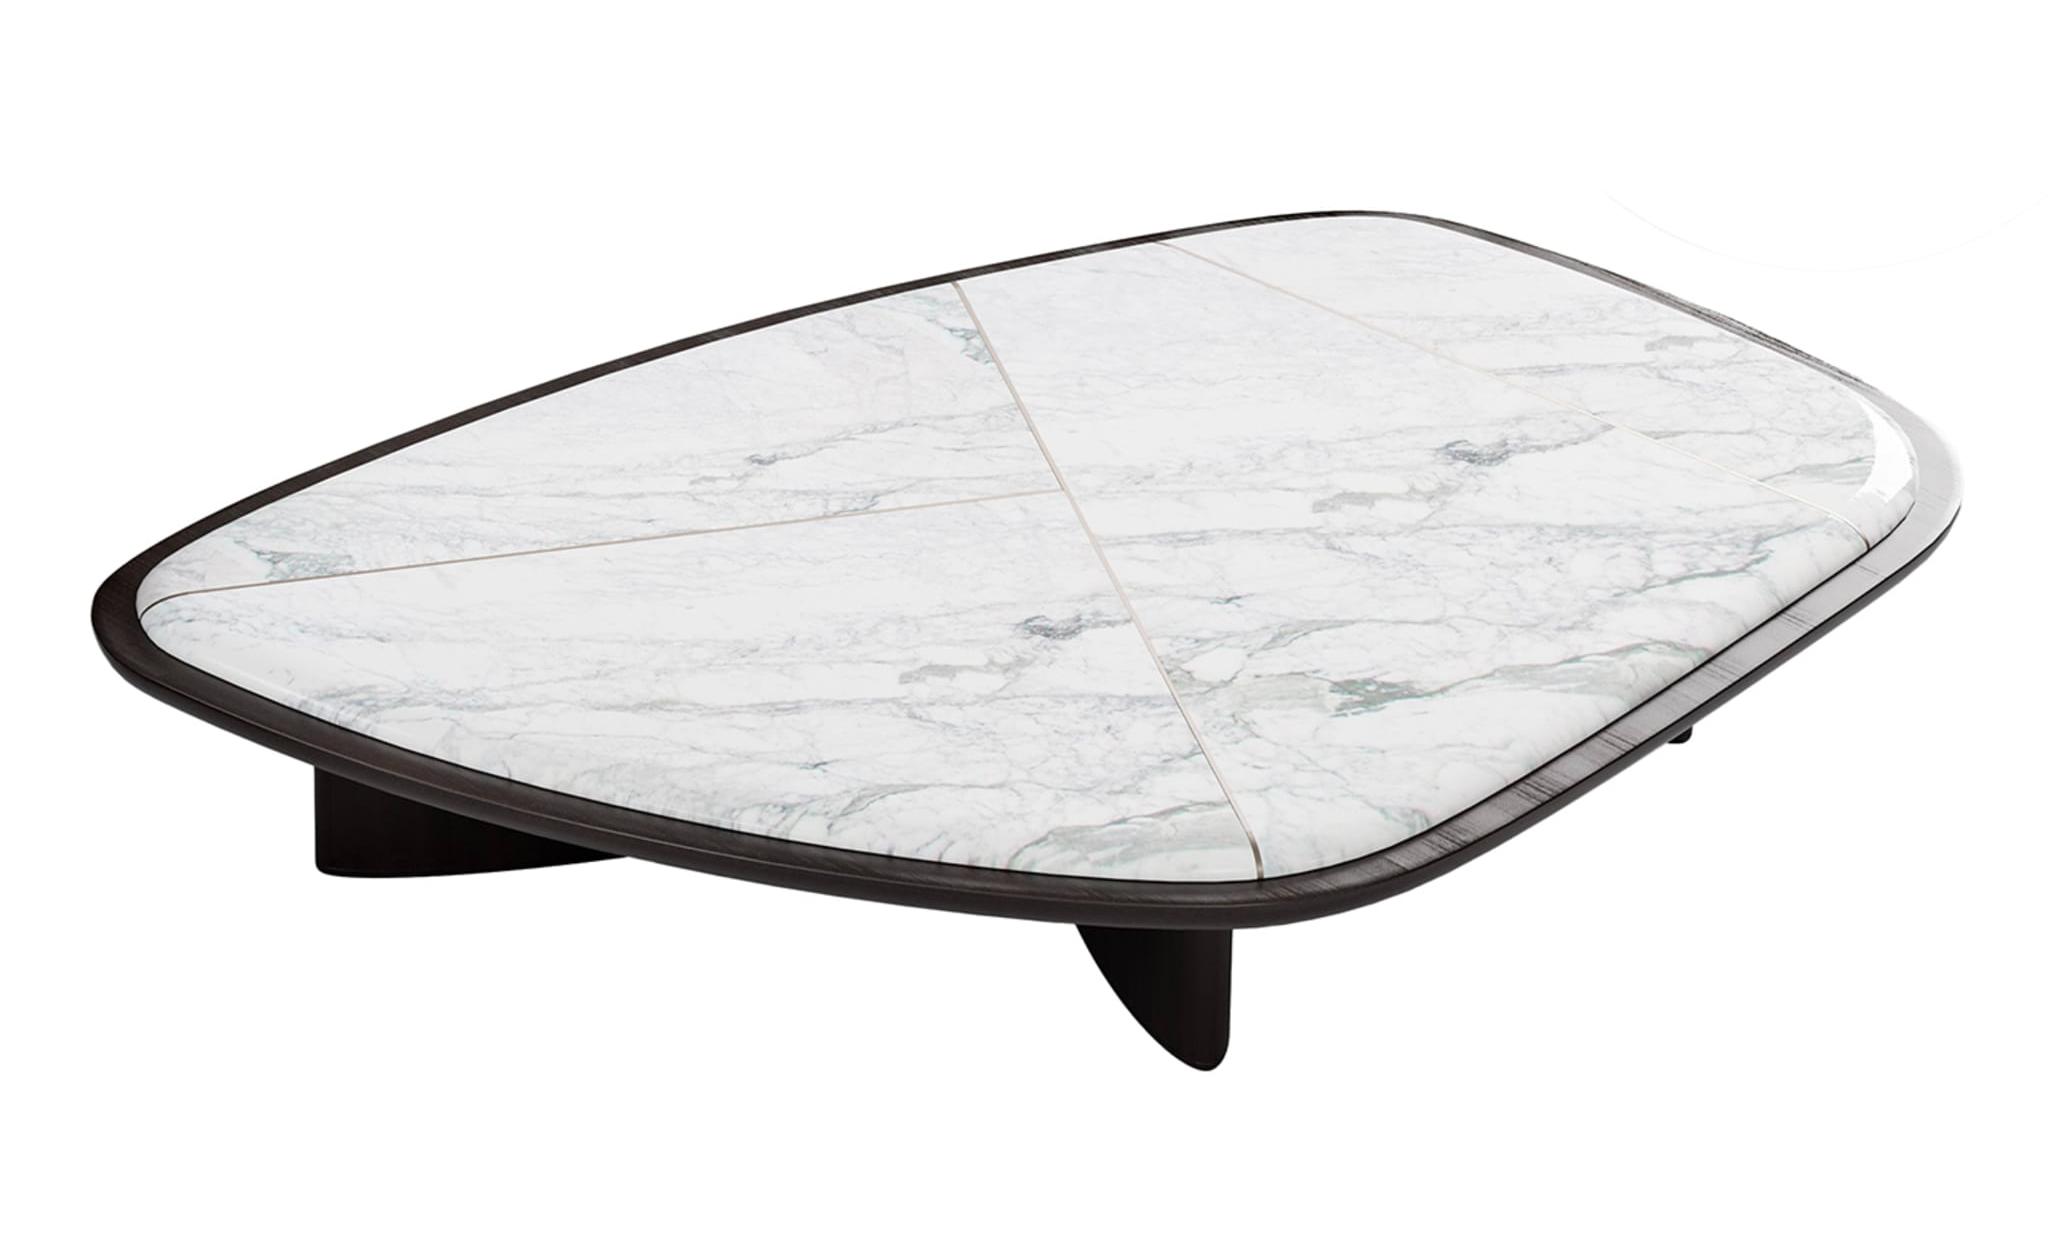 Kigali Unique Marble Coffee Table